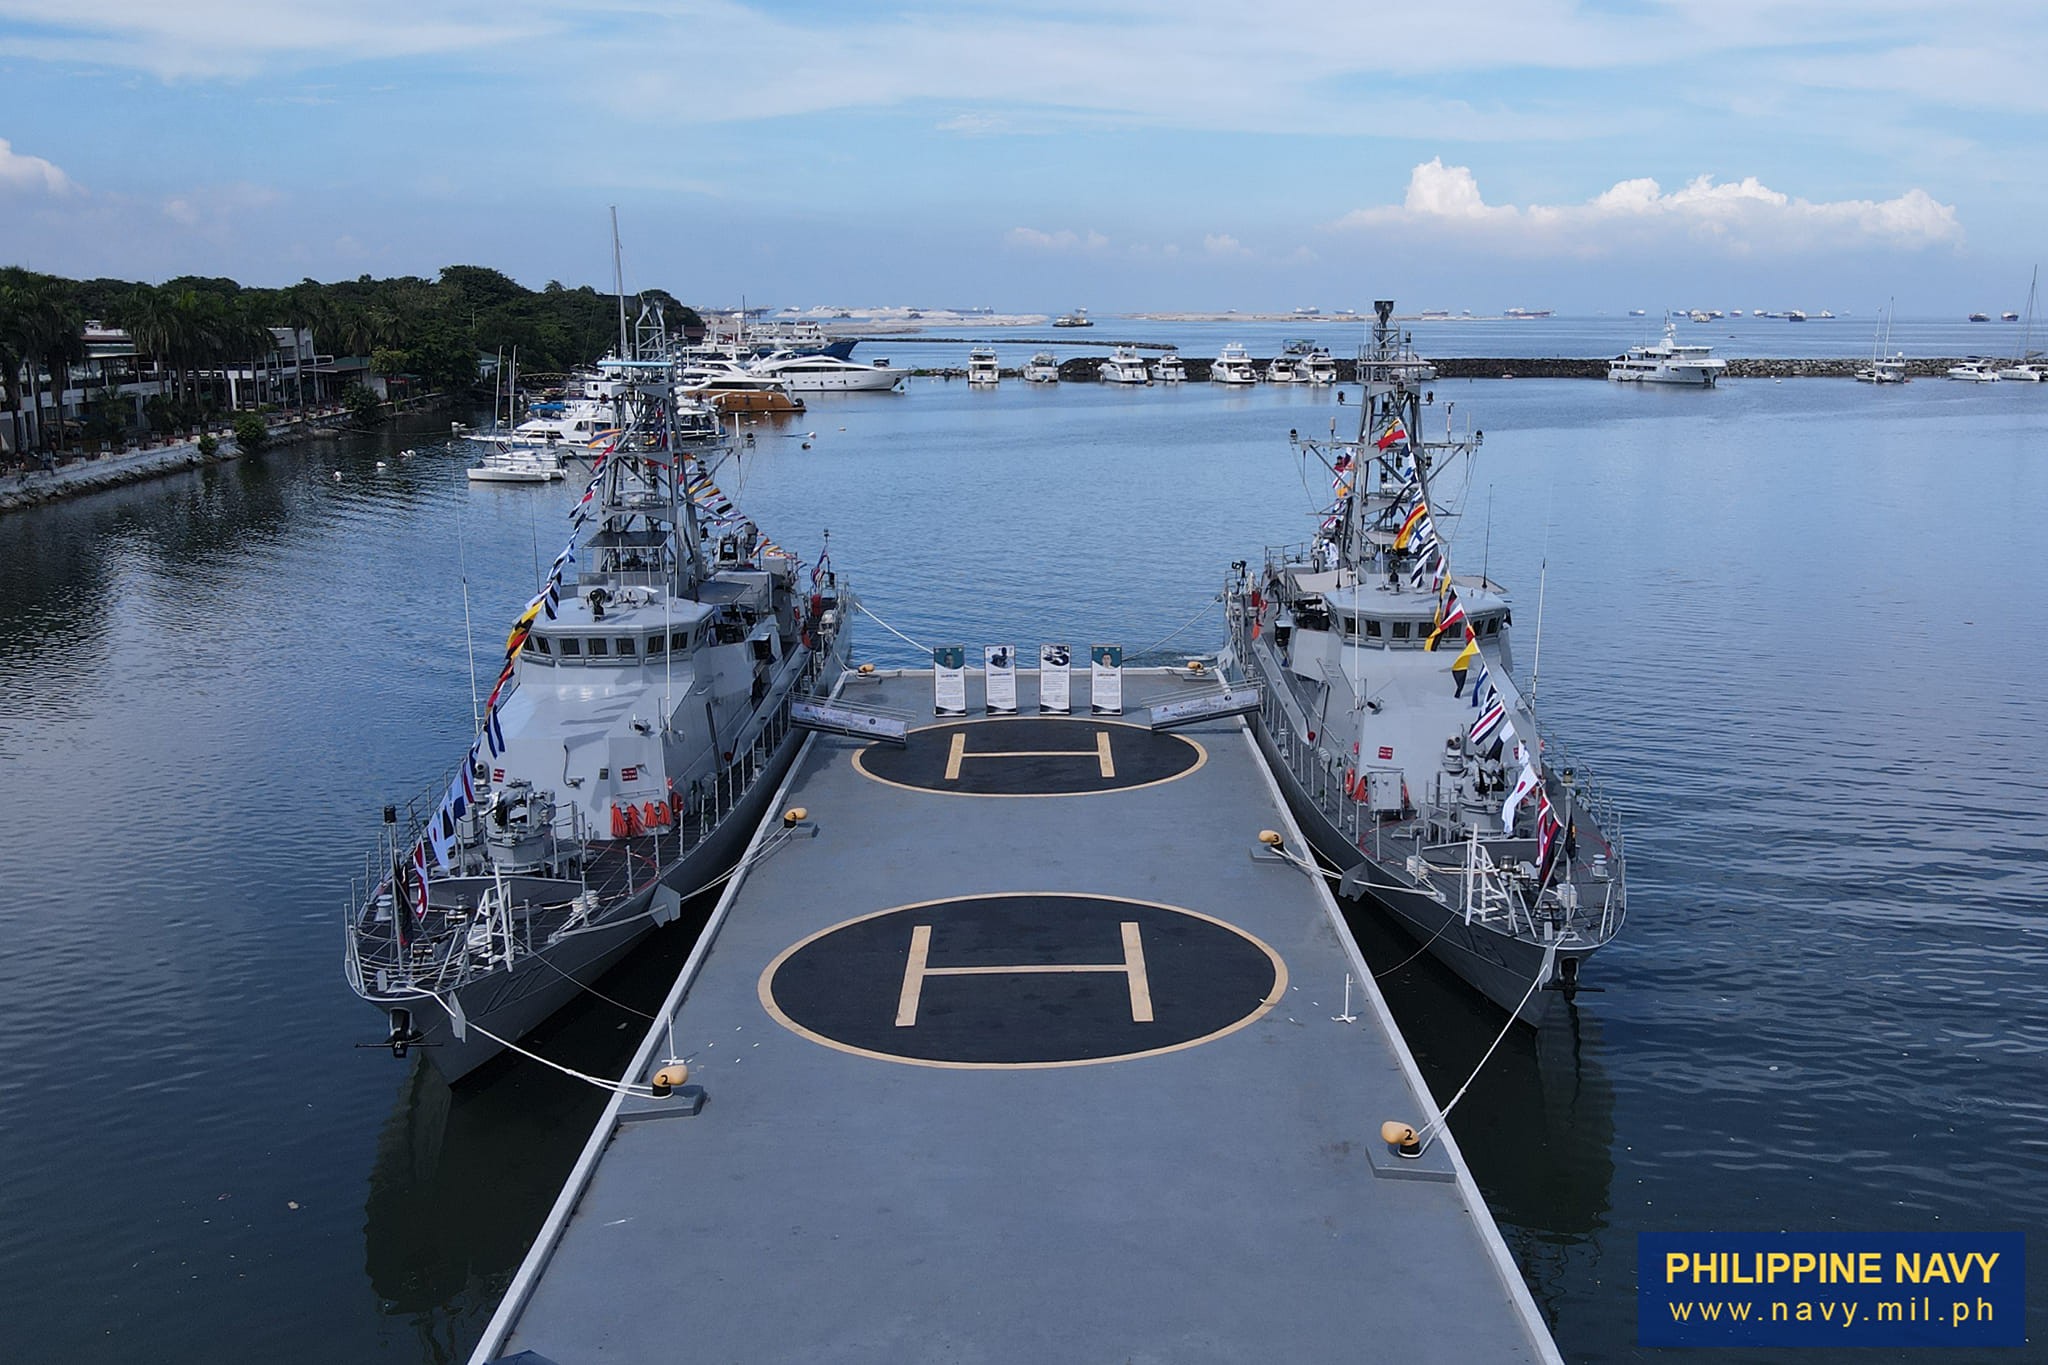 BRP Valentin Diaz and BRP Ladislao Diwa are seen docked in the Philippine Navy Headquarters' pier. The two Cyclone-class patrol ships were previously known as the US Navy's USS Monsoon and USS Chinook before they were decommissioned and transferred to the Philippine Navy.